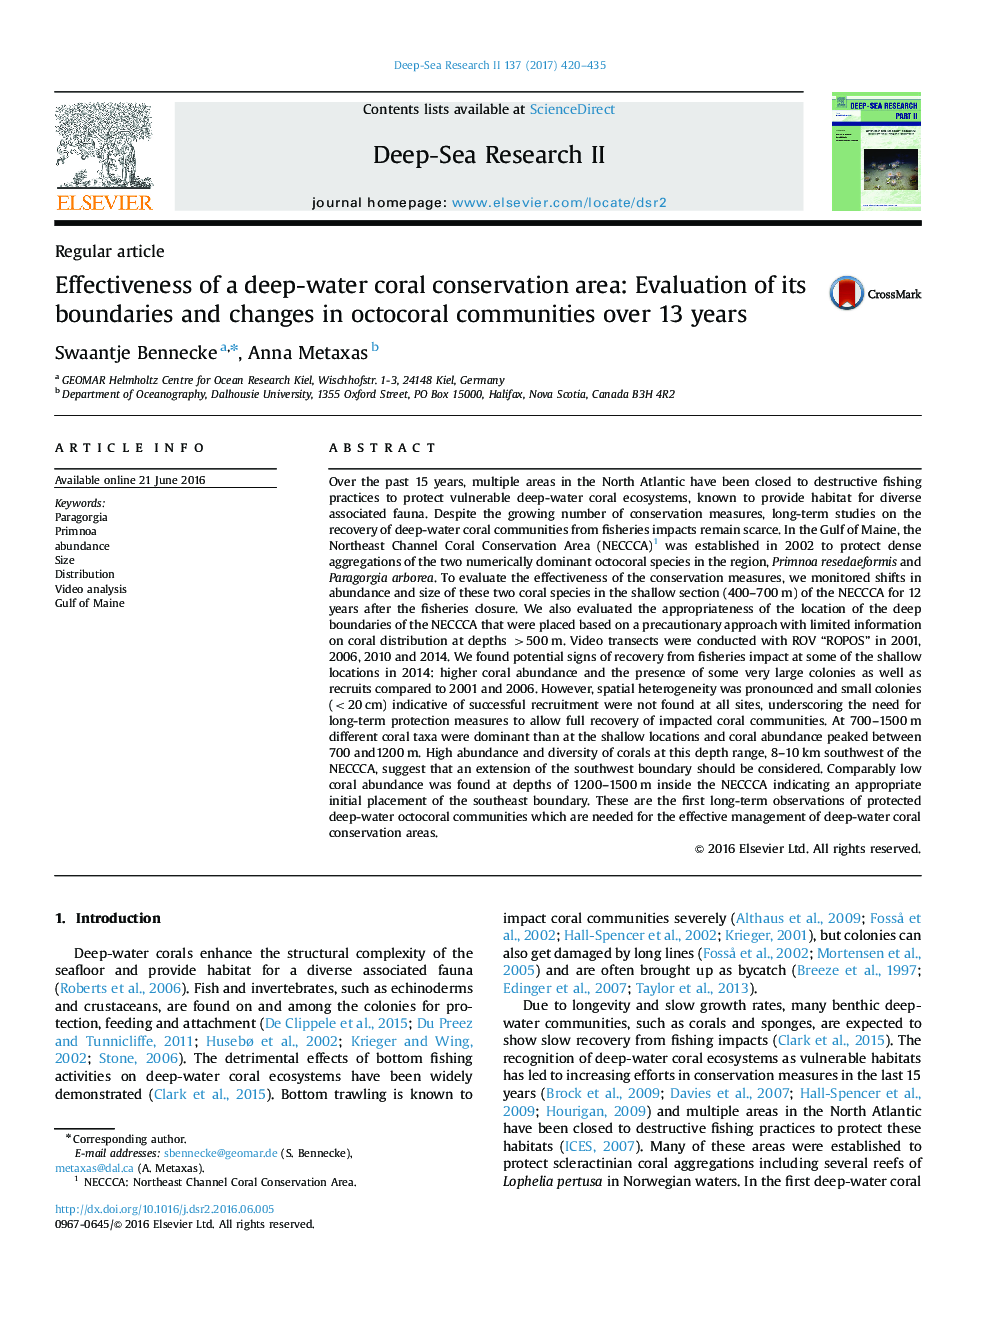 Regular articleEffectiveness of a deep-water coral conservation area: Evaluation of its boundaries and changes in octocoral communities over 13 years